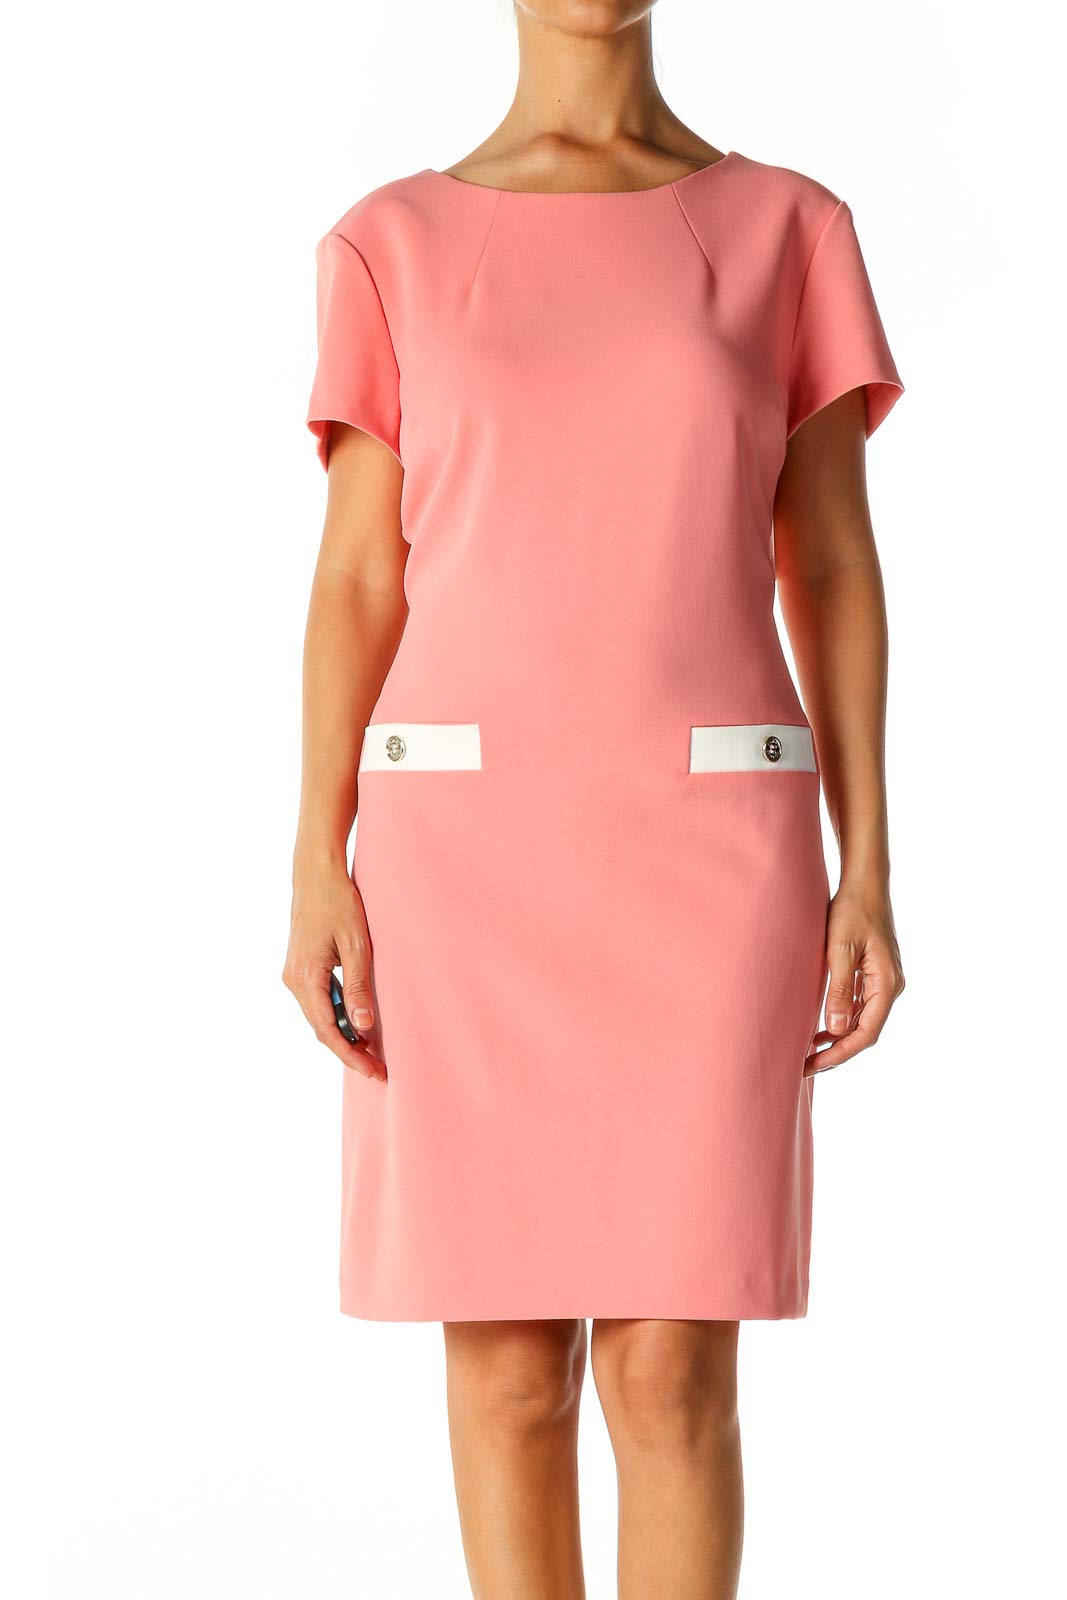 Pink Solid Work Sheath Dress Front